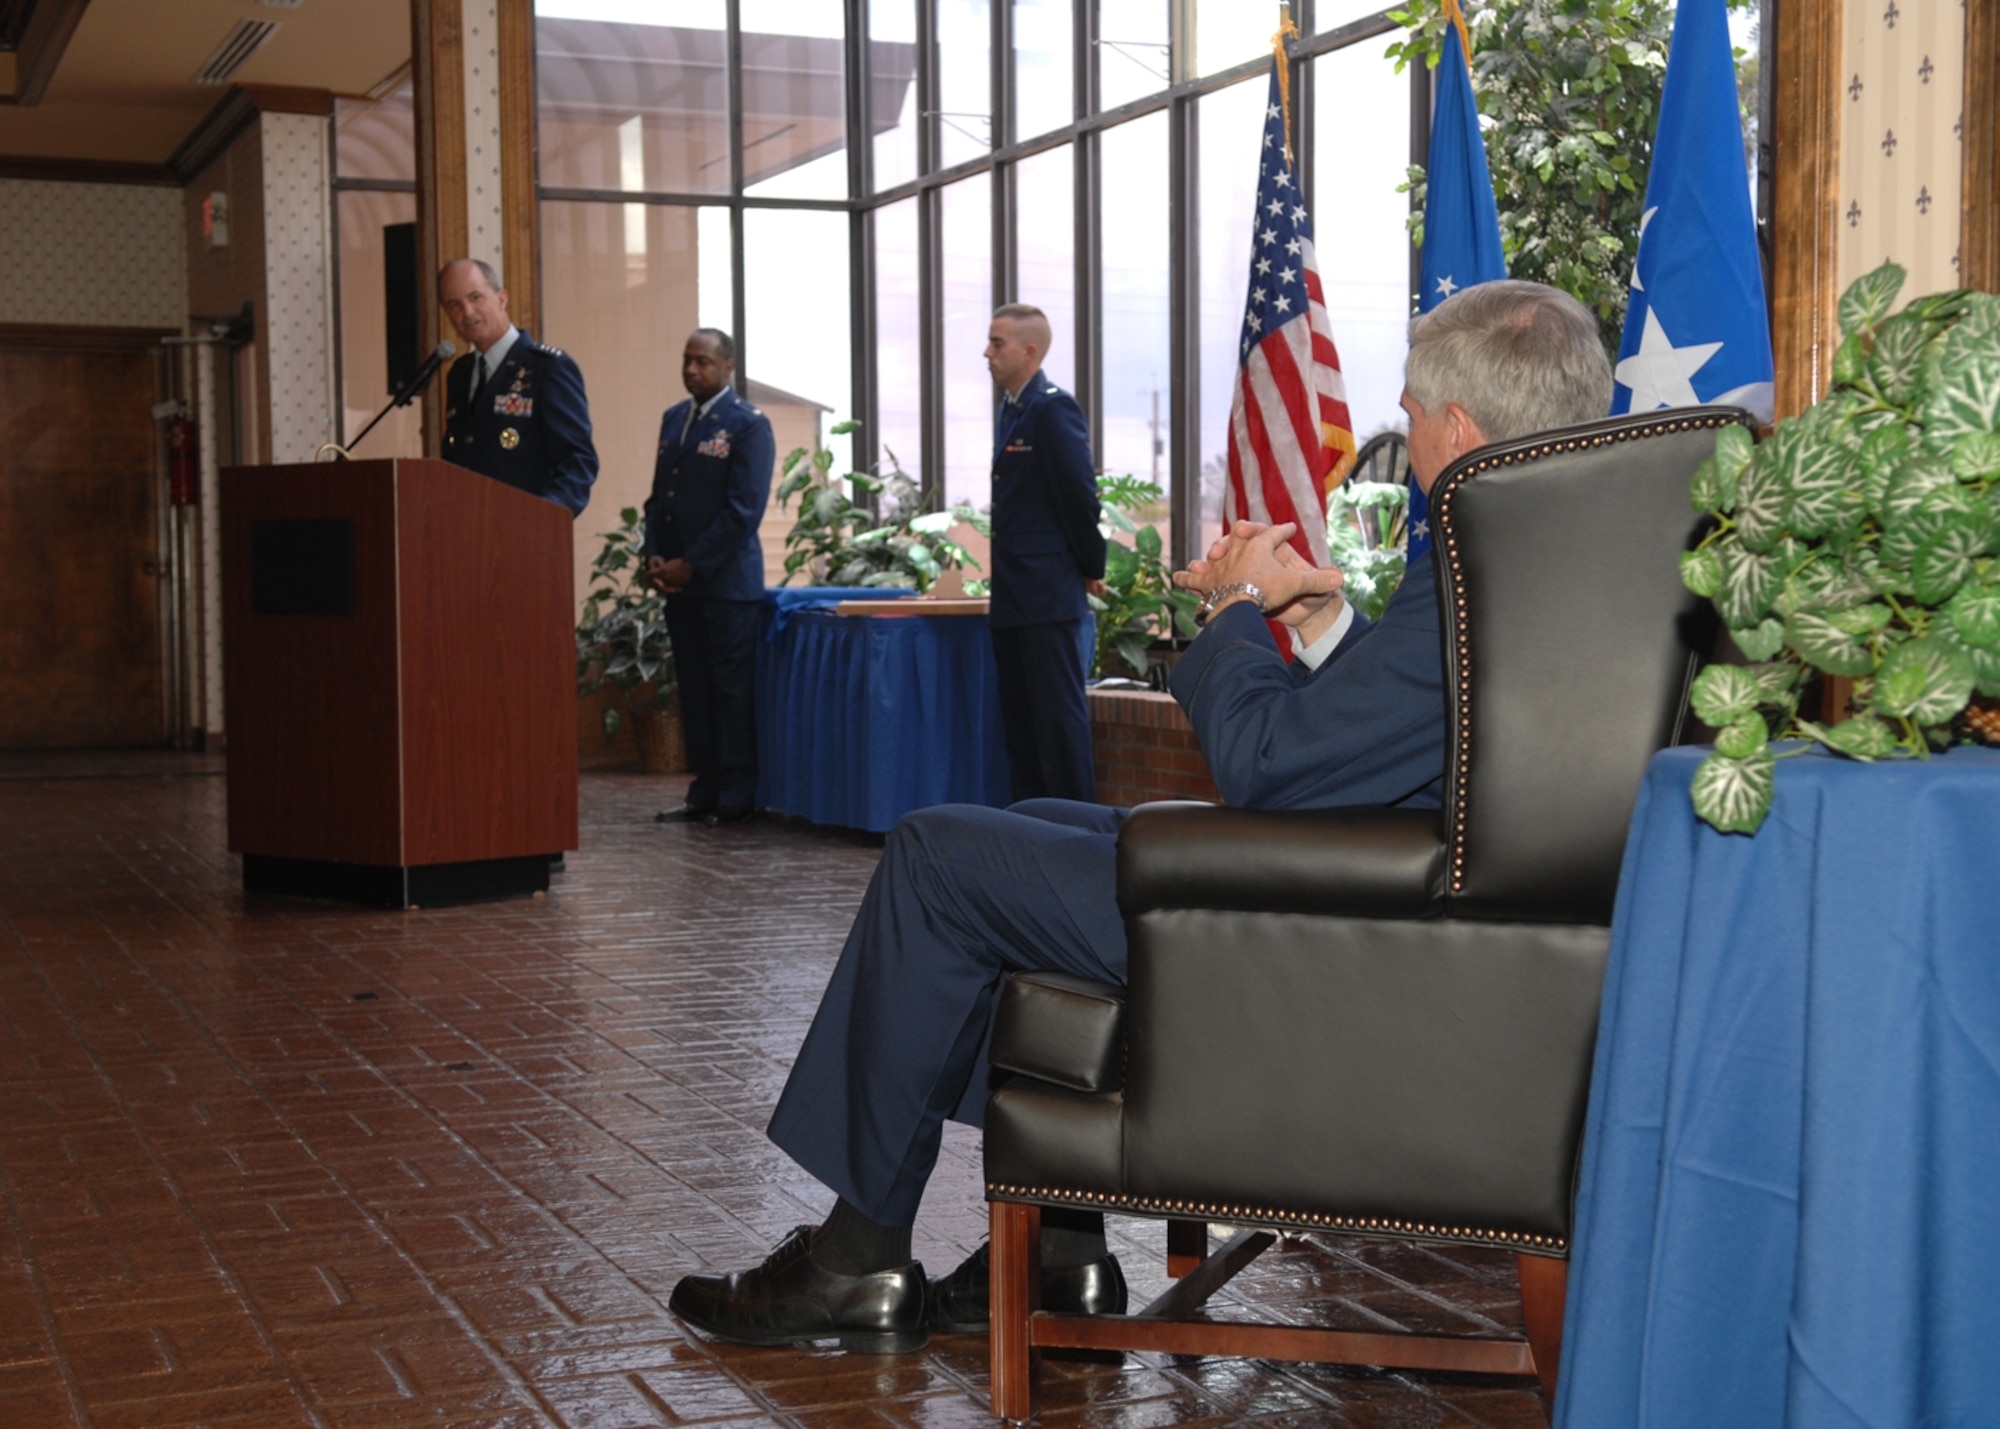 Gen. Kevin Chilton, Air Force Space Command commander, speaks to Colonel Moore. General Chilton was the guest speaker for the ceremony. (U.S. Air Force photo by Airman 1st Class Jamal Sutter)